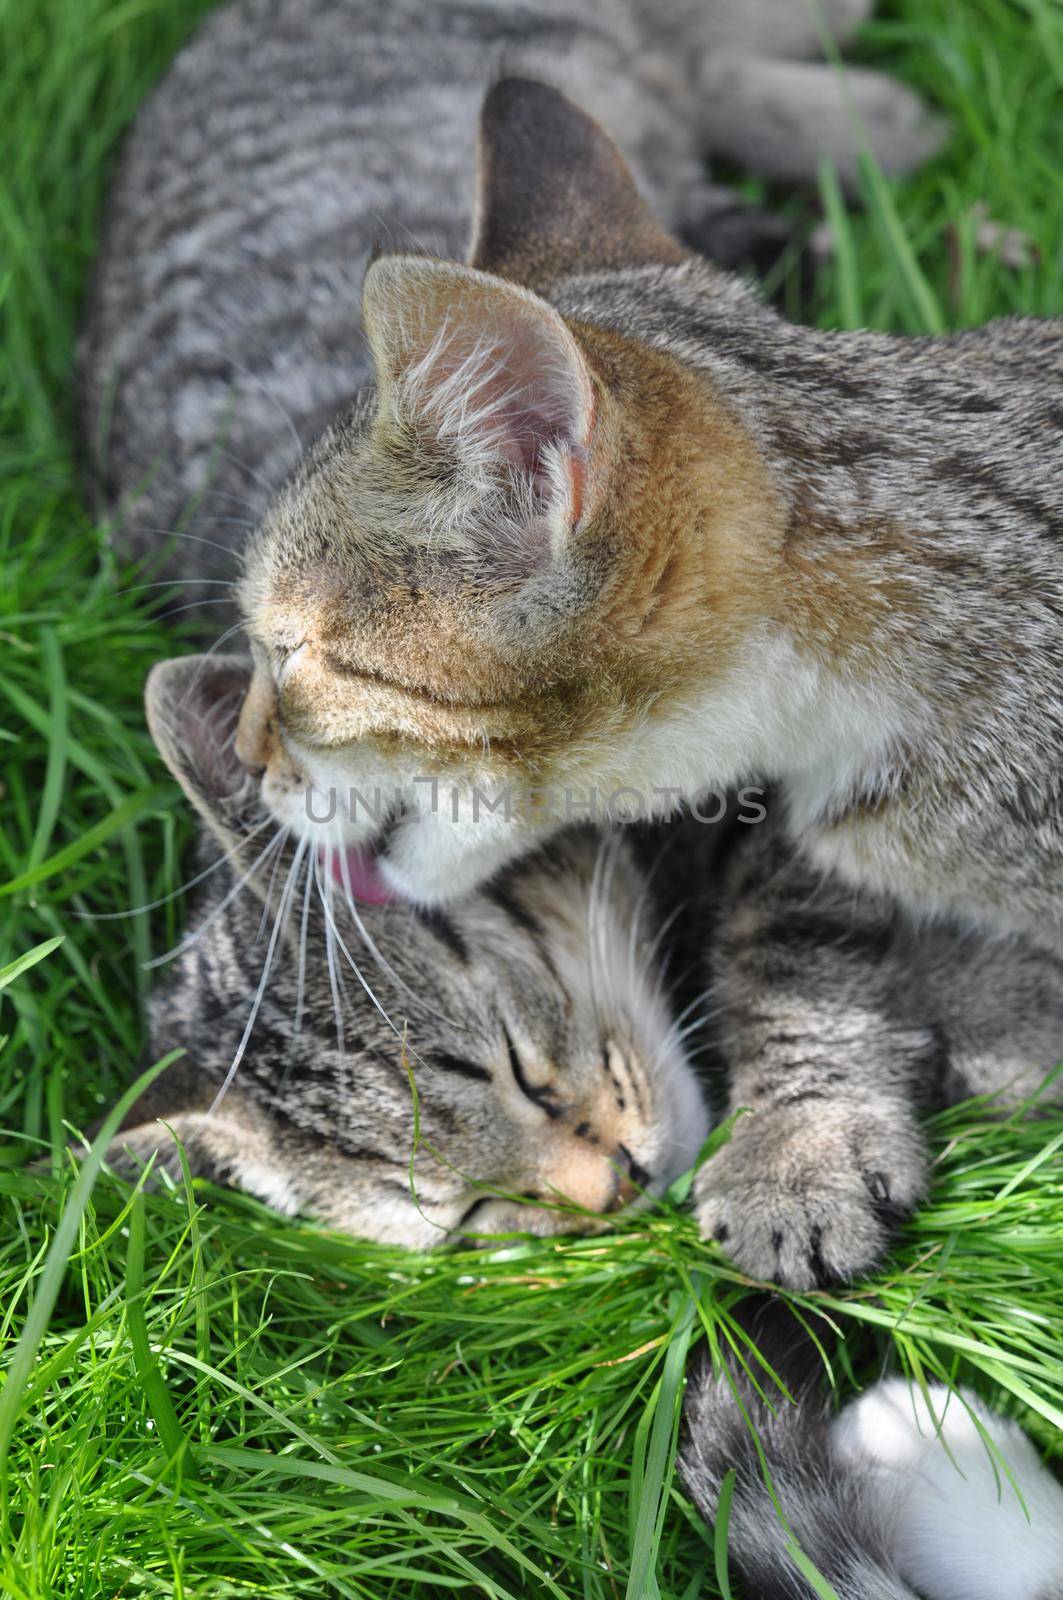 Two striped kittens sitting in the green grass